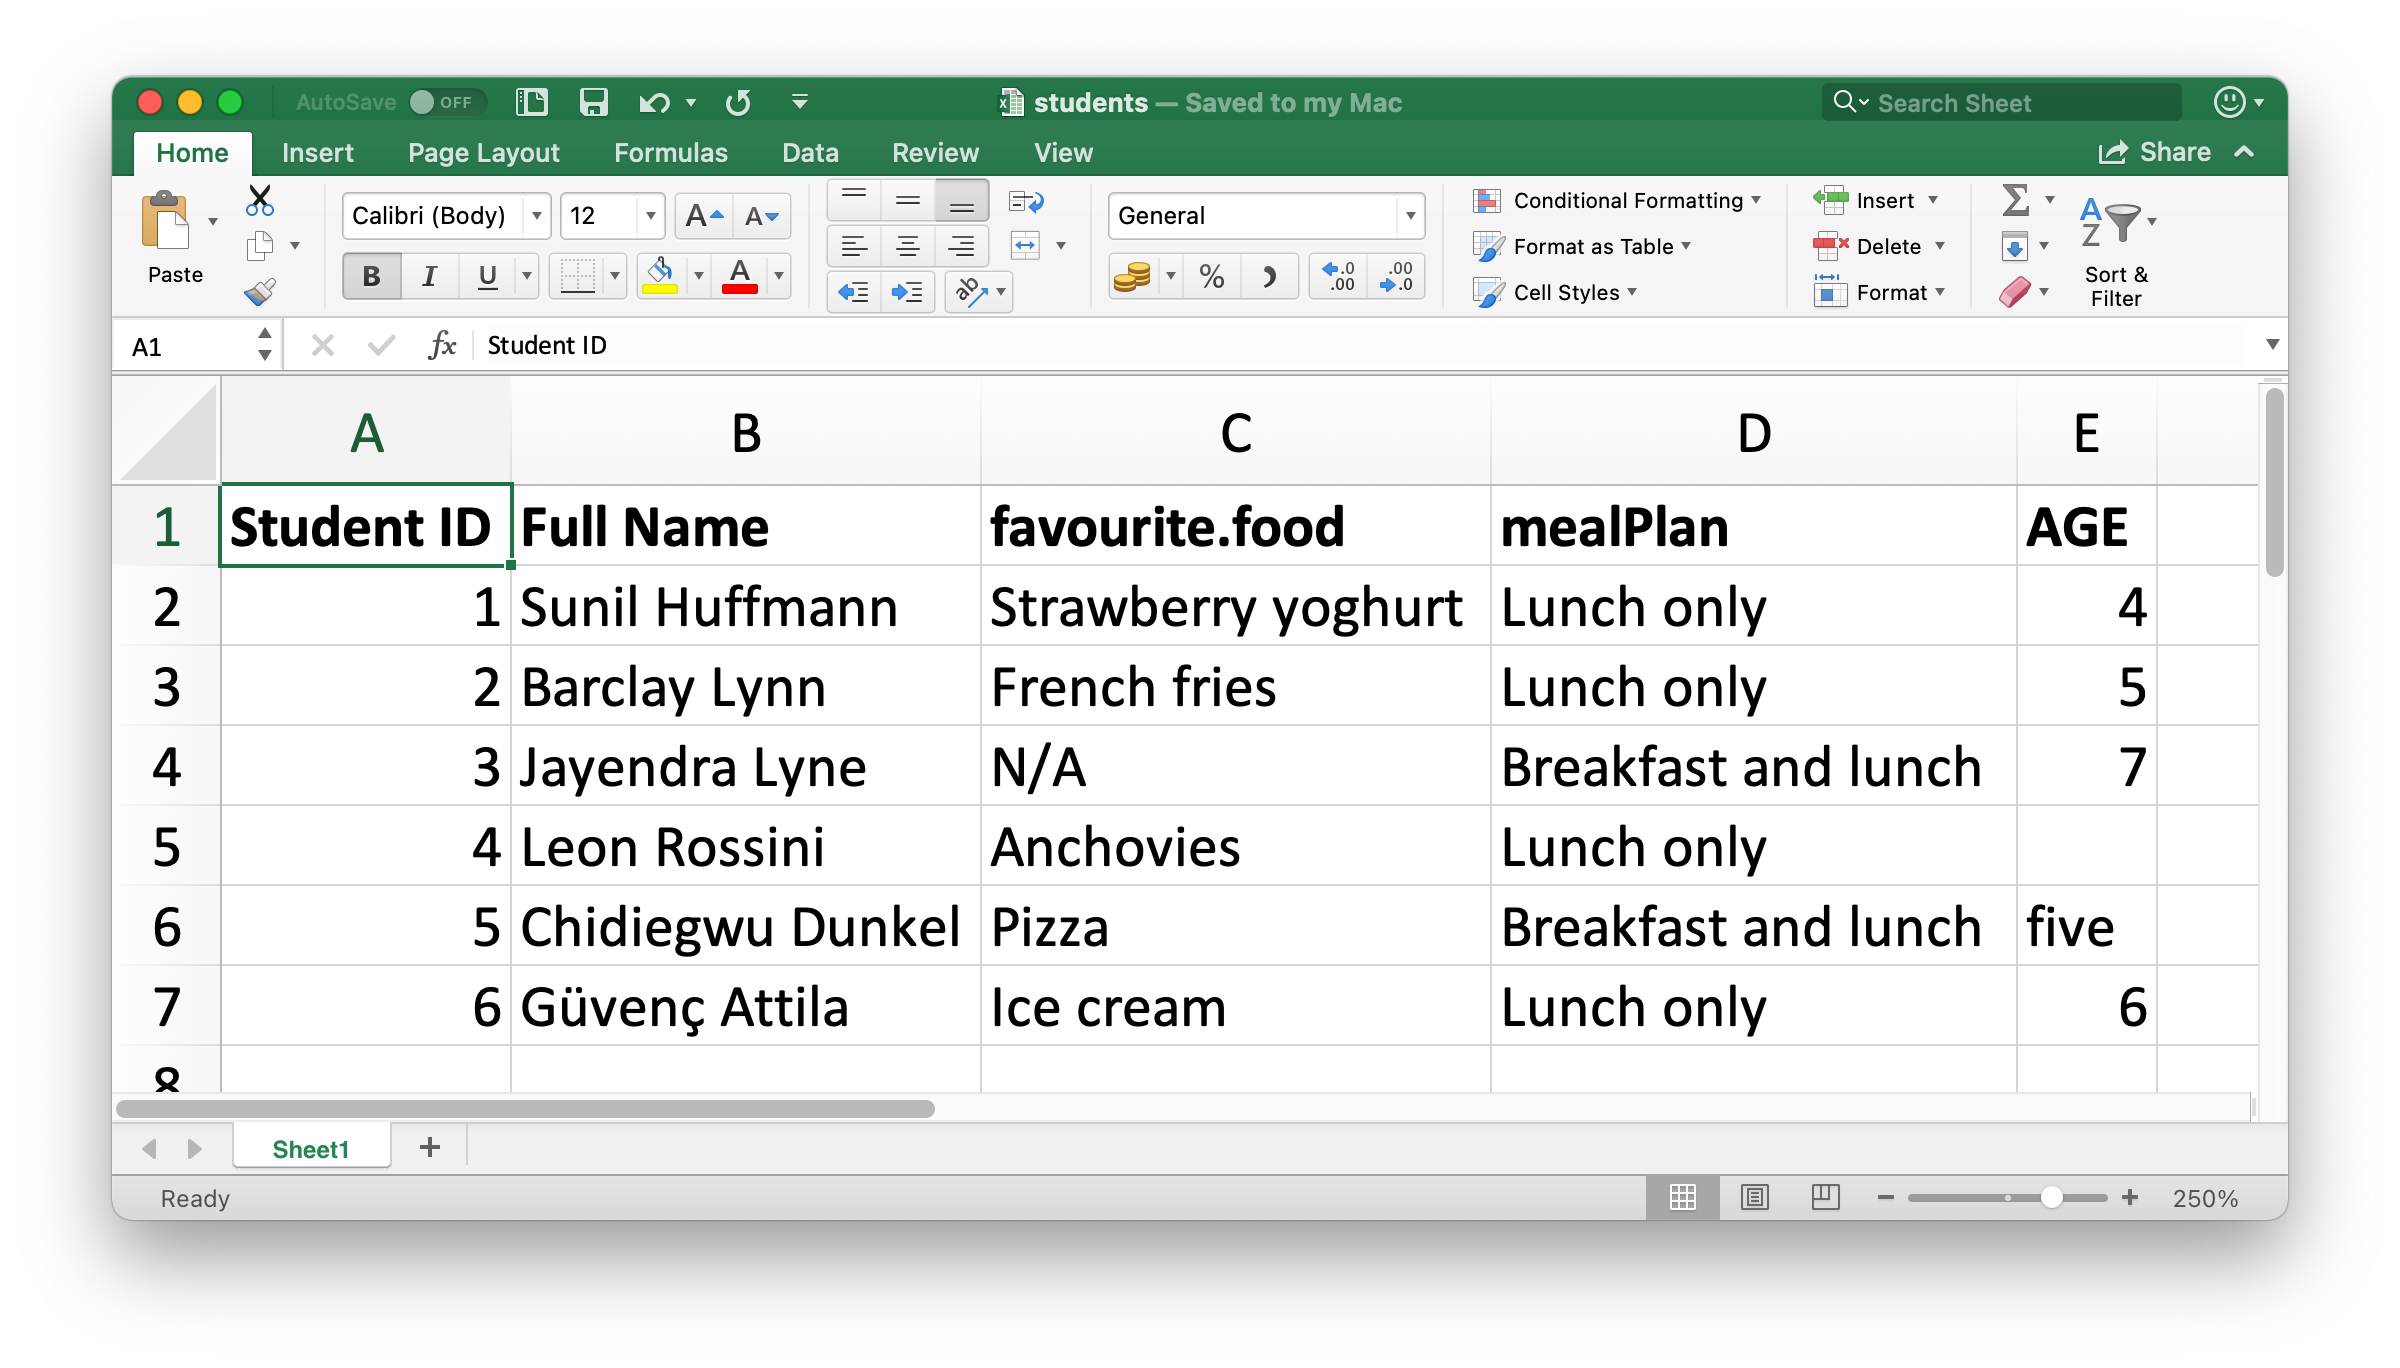 A look at the students spreadsheet in Excel. The spreadsheet contains information on 6 students, their ID, full name, favourite food, meal plan, and age.